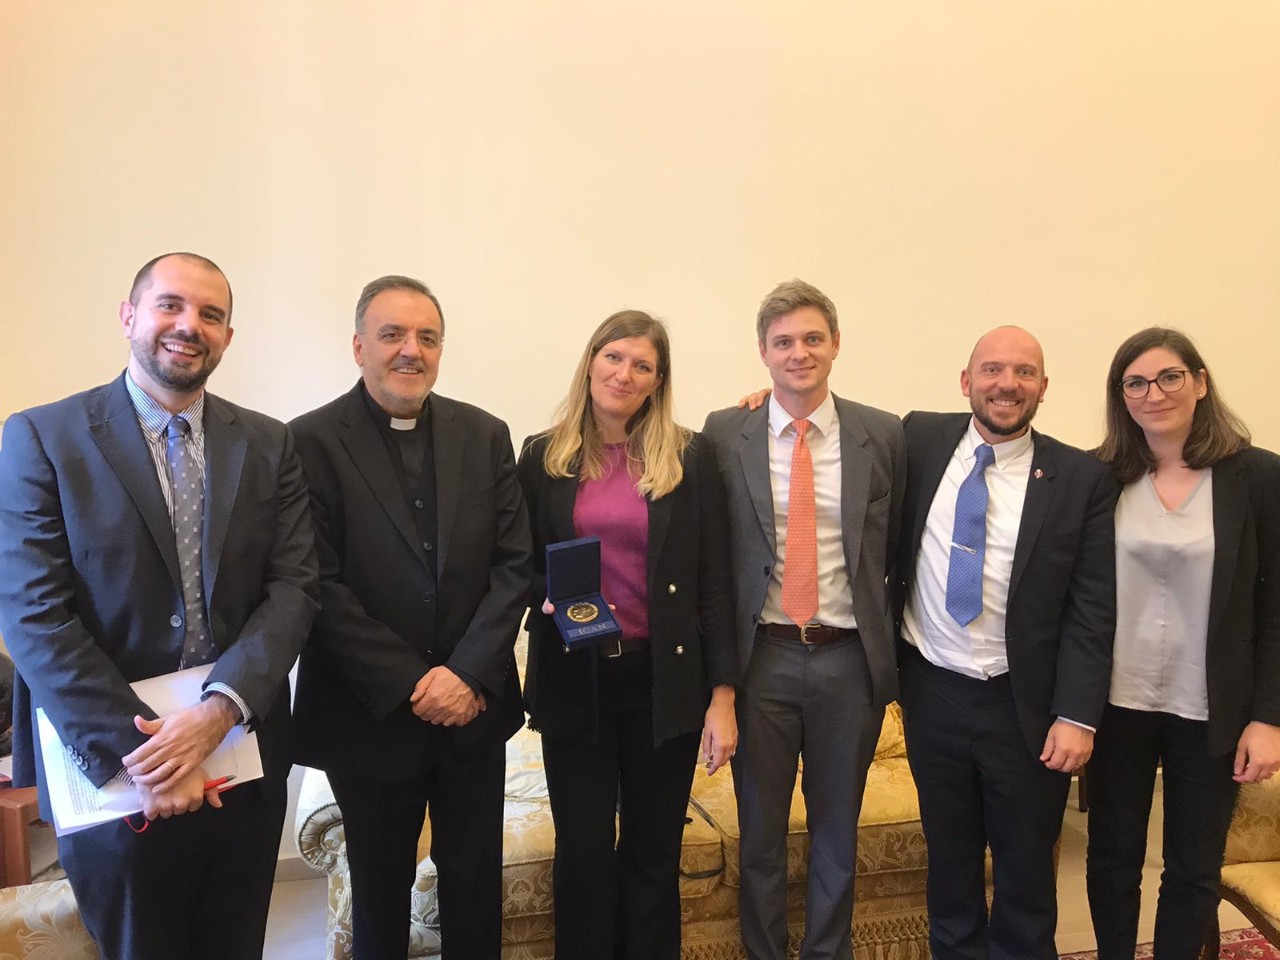 The Dicastery meets the ICAN Nuclear Disarmament Association, which was awarded the Nobel Peace Prize in 2017